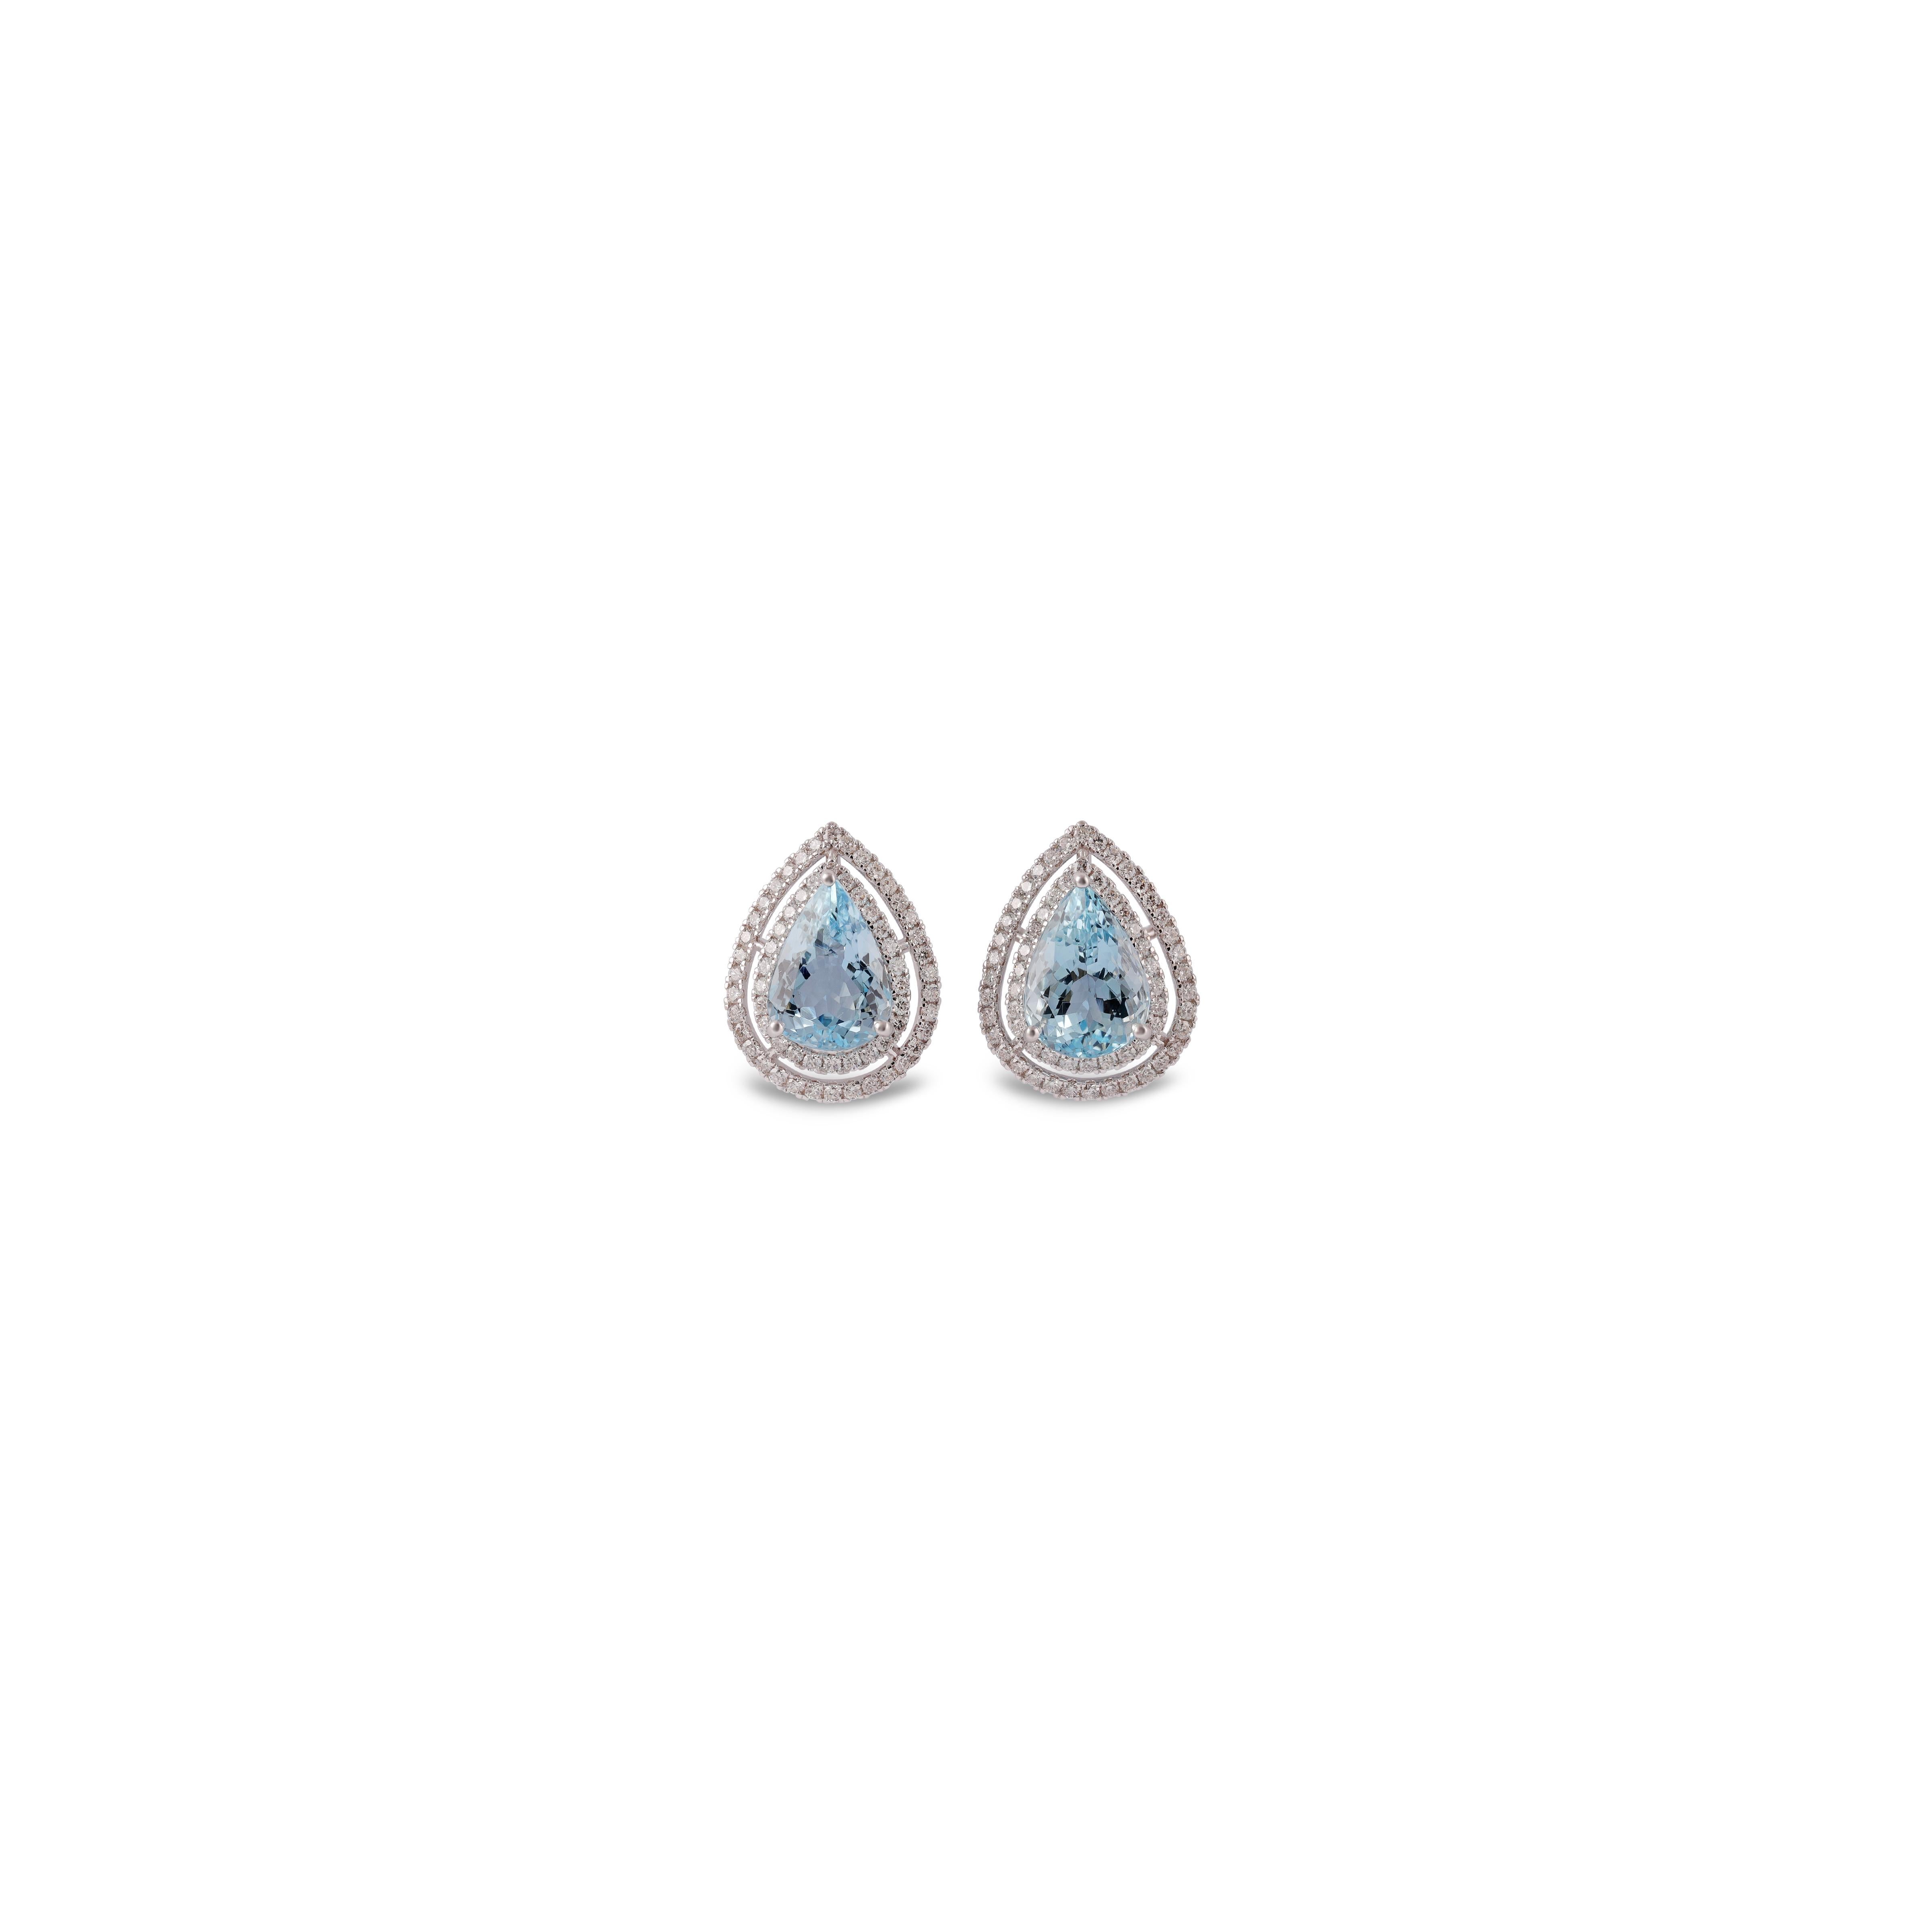 This is an elegant Aquamarine & diamond Earring studded in 18k White gold with 2 piece of Pear 0r Drop Cut  shaped  Aquamarine weight 4.85 carat which is surrounded by 124 pieces of round shaped diamonds weight 0.78 carat, this entire ring studded